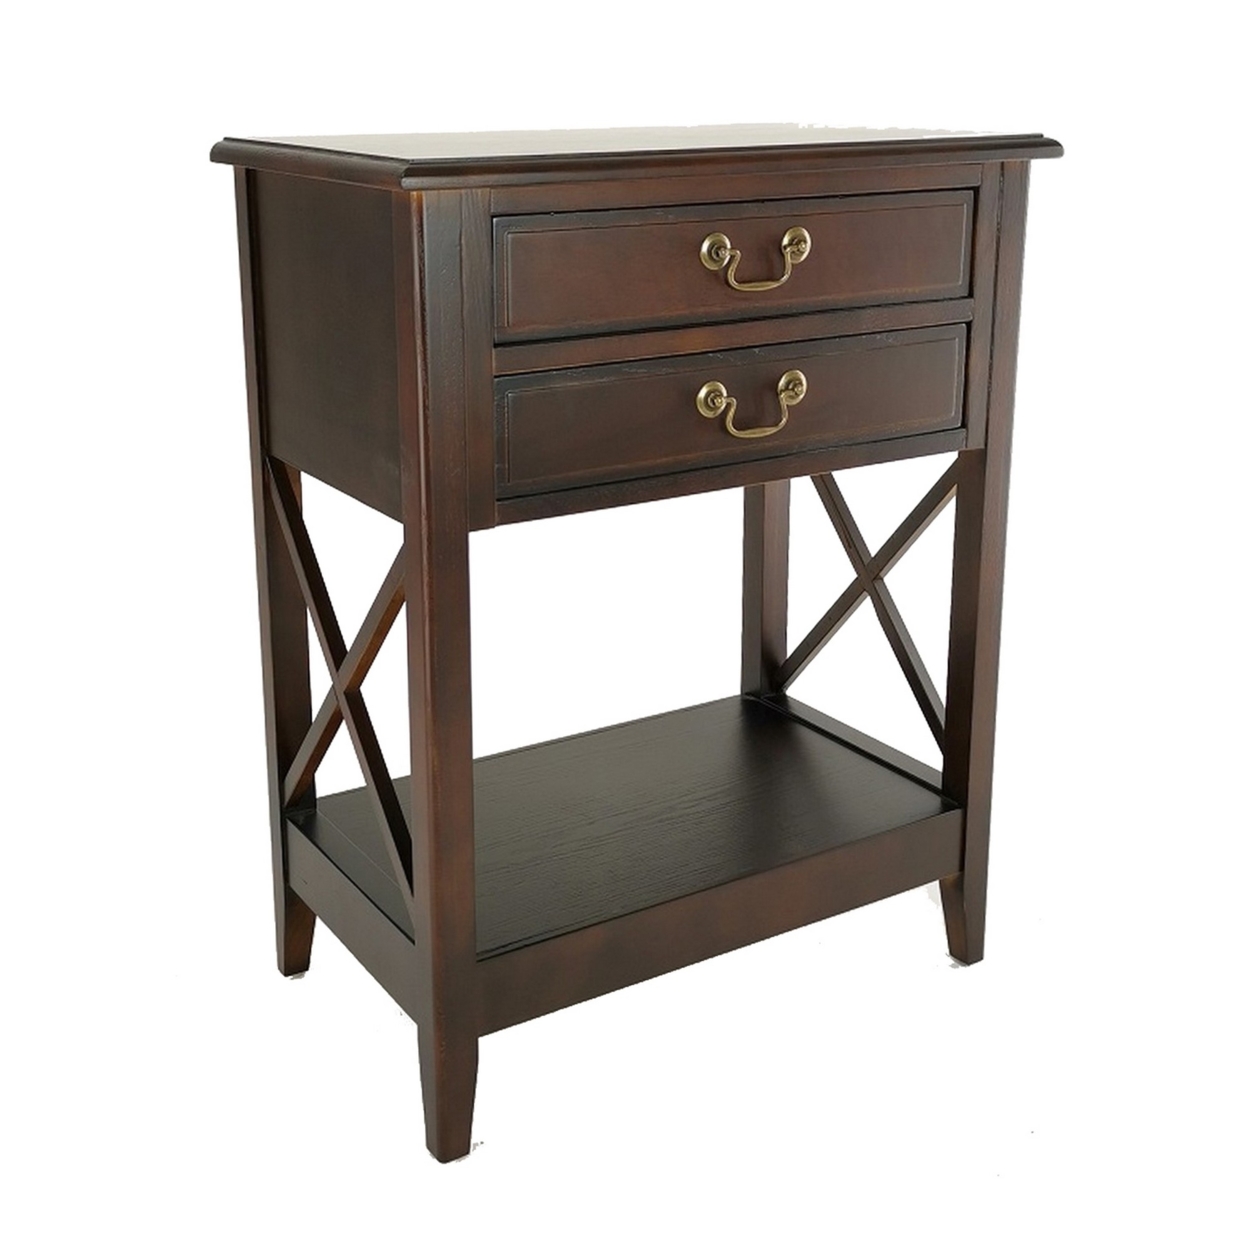 Nightstand With 2 Drawers And Criss Cross Sides, Espresso Brown- Saltoro Sherpi